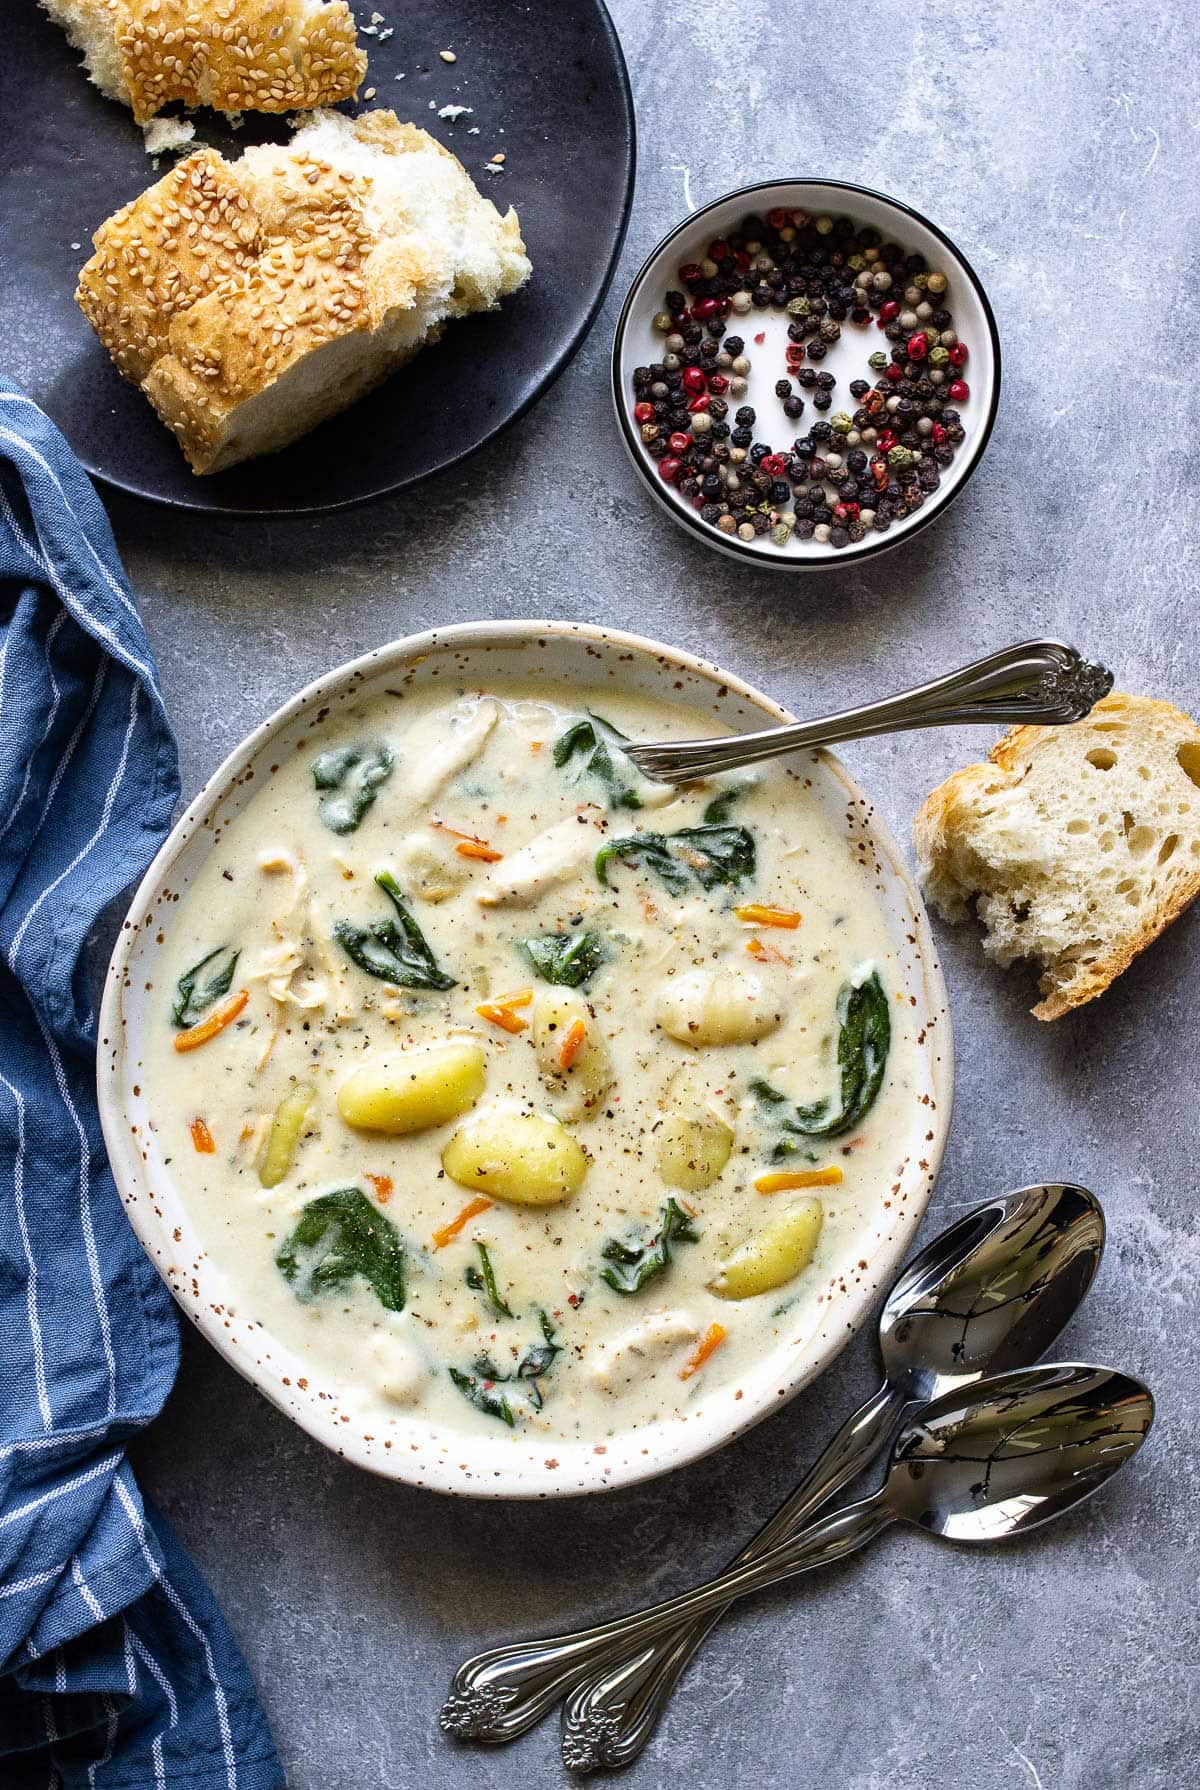 A bowl of slow cooker chicken gnocchi soup with bread.